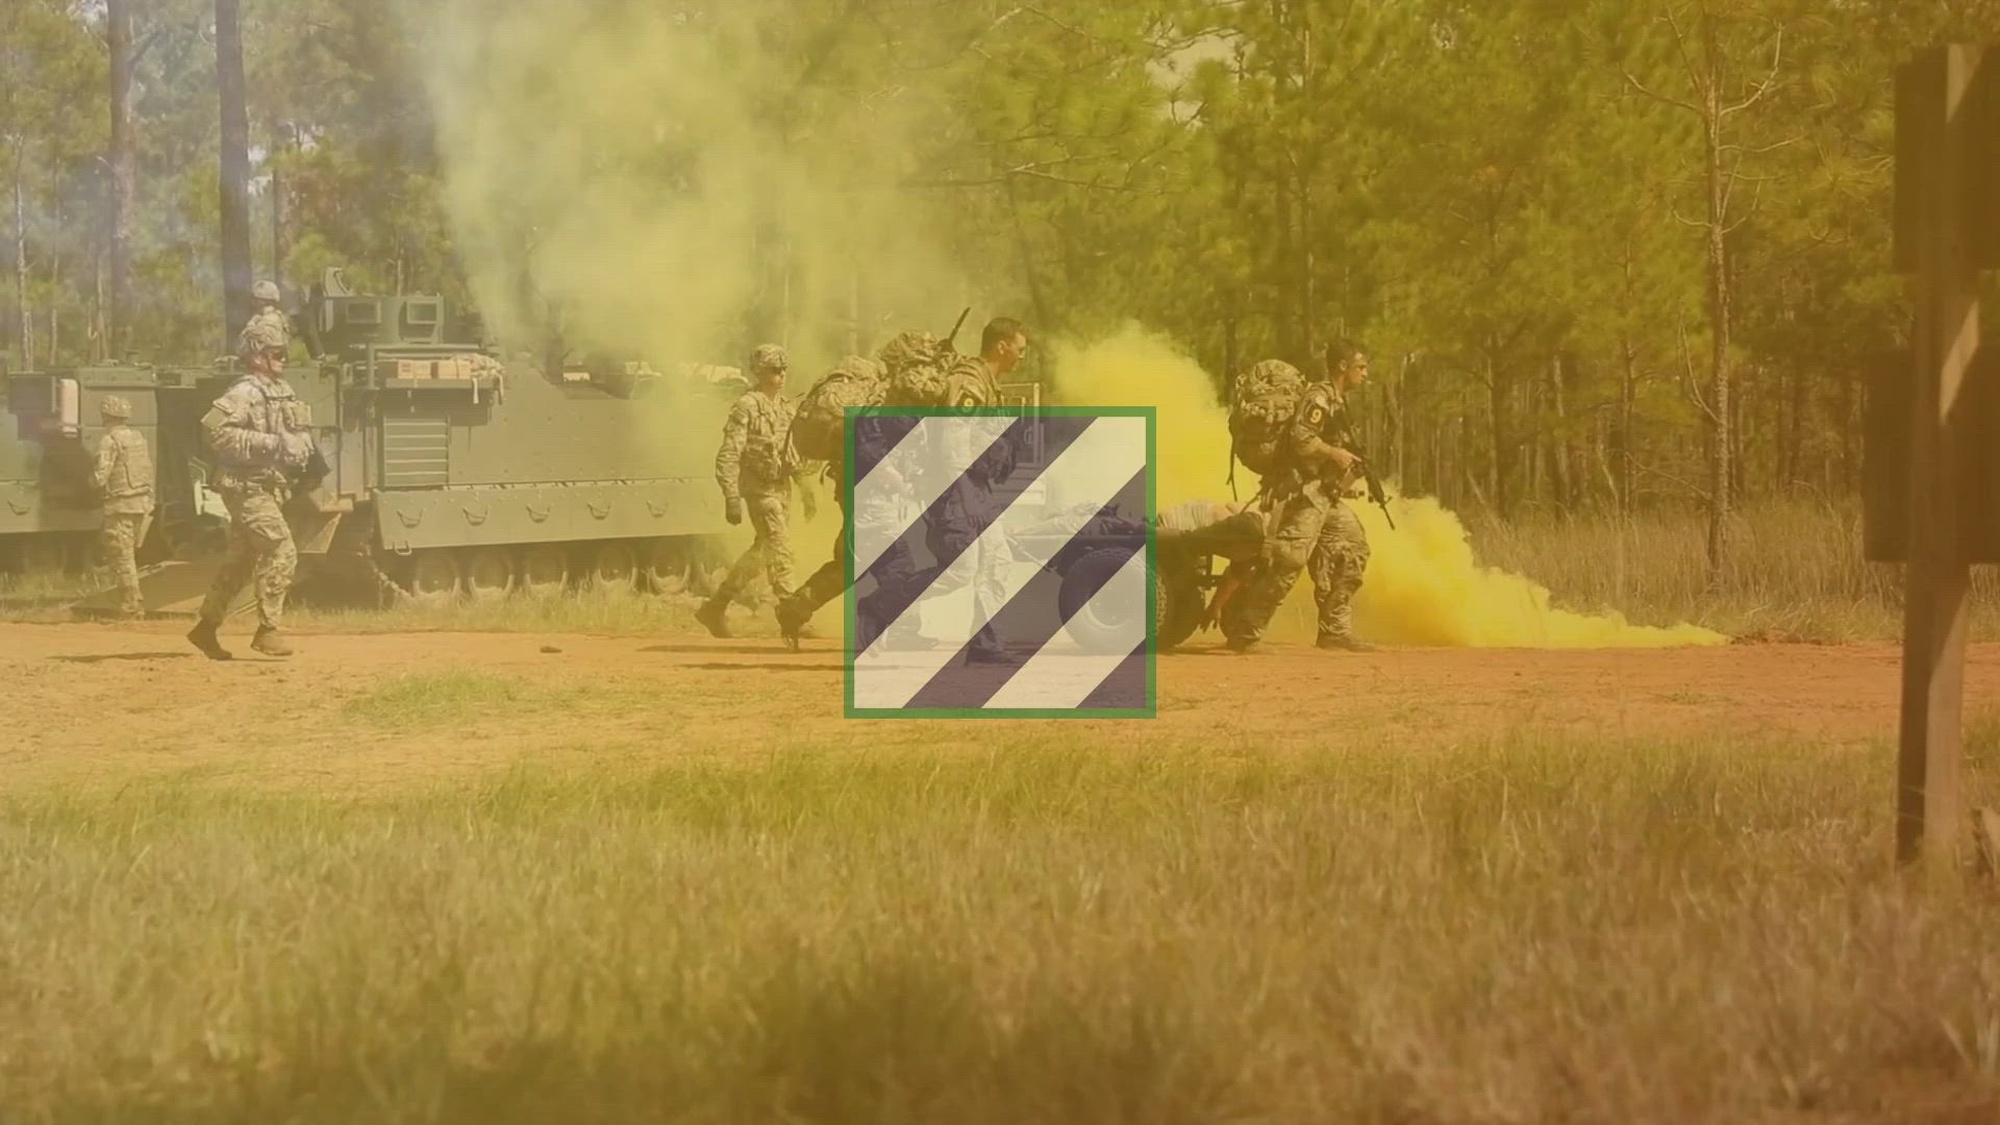 3rd Infantry Division's Army vs. Navy 2023 football video for social media. (U.S. Army video by Sgt. Summer Keiser, Sgt. 1st Class Jason Hull, Sgt. Michael Udejiofor, Spc. Bernabe Lopez III)